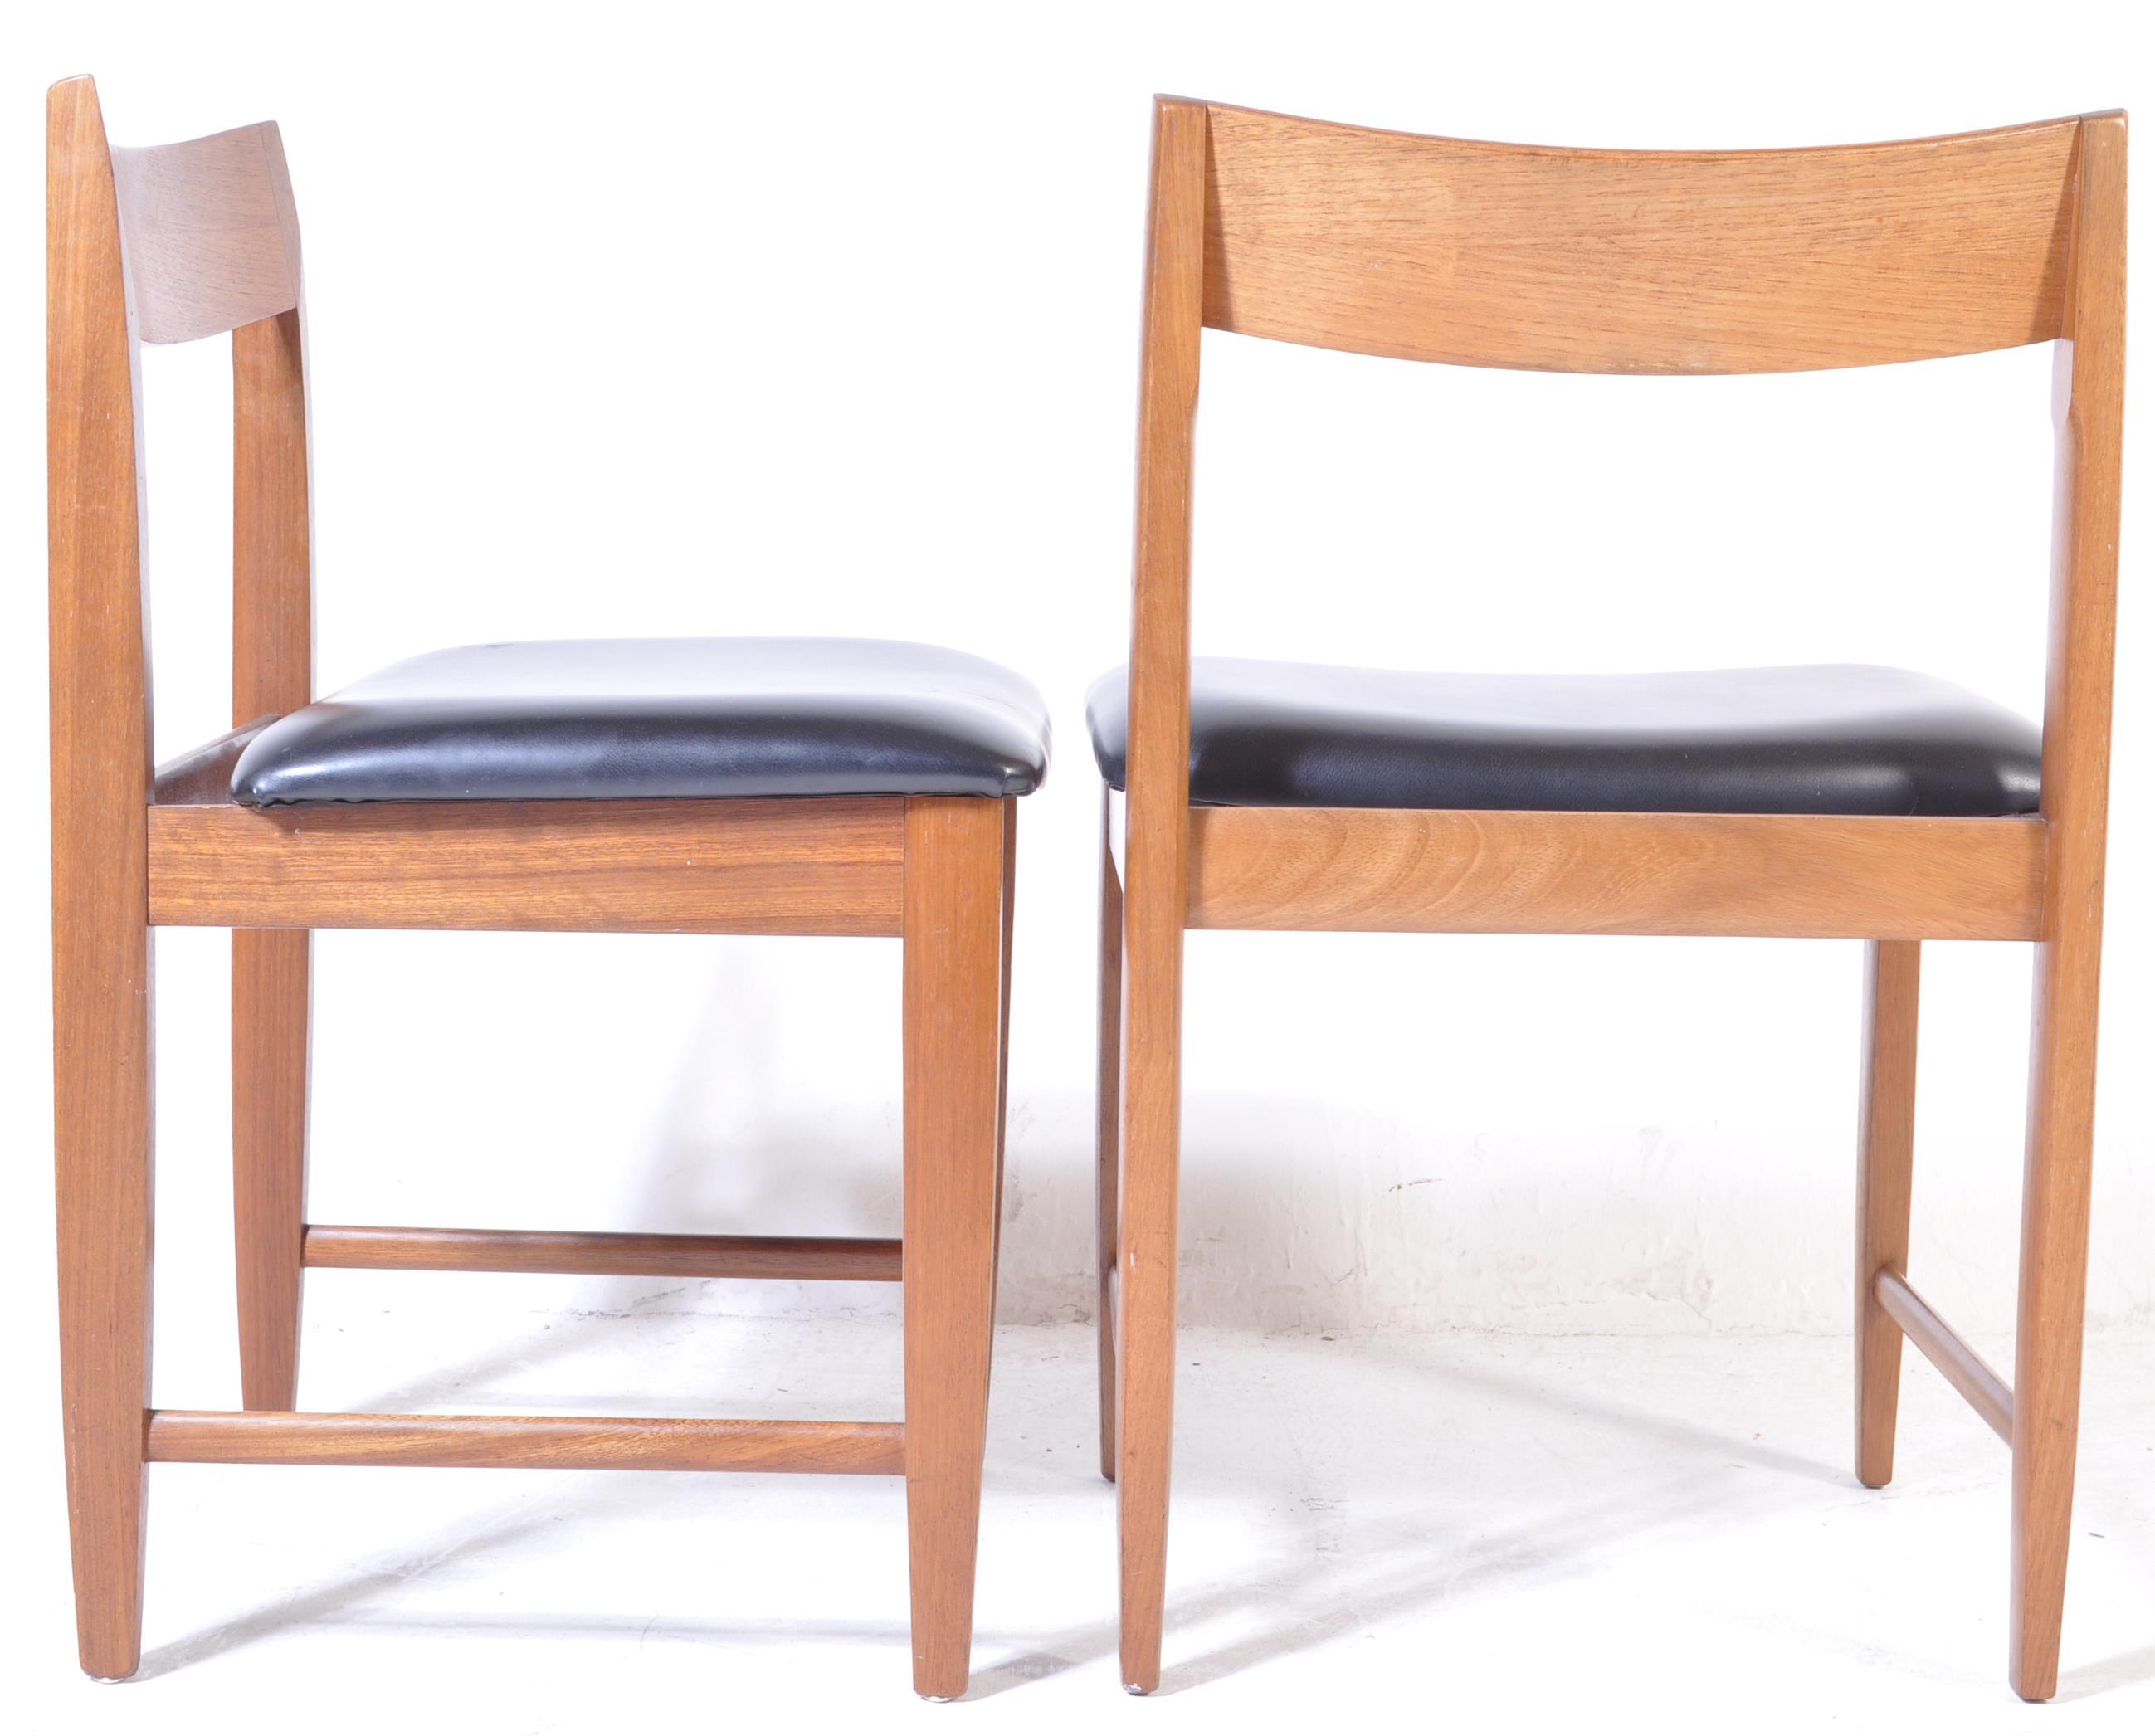 1960’S DANISH INSPIRED TEAK DROP LEAF DINING TABLE & CHAIRS - Image 7 of 7